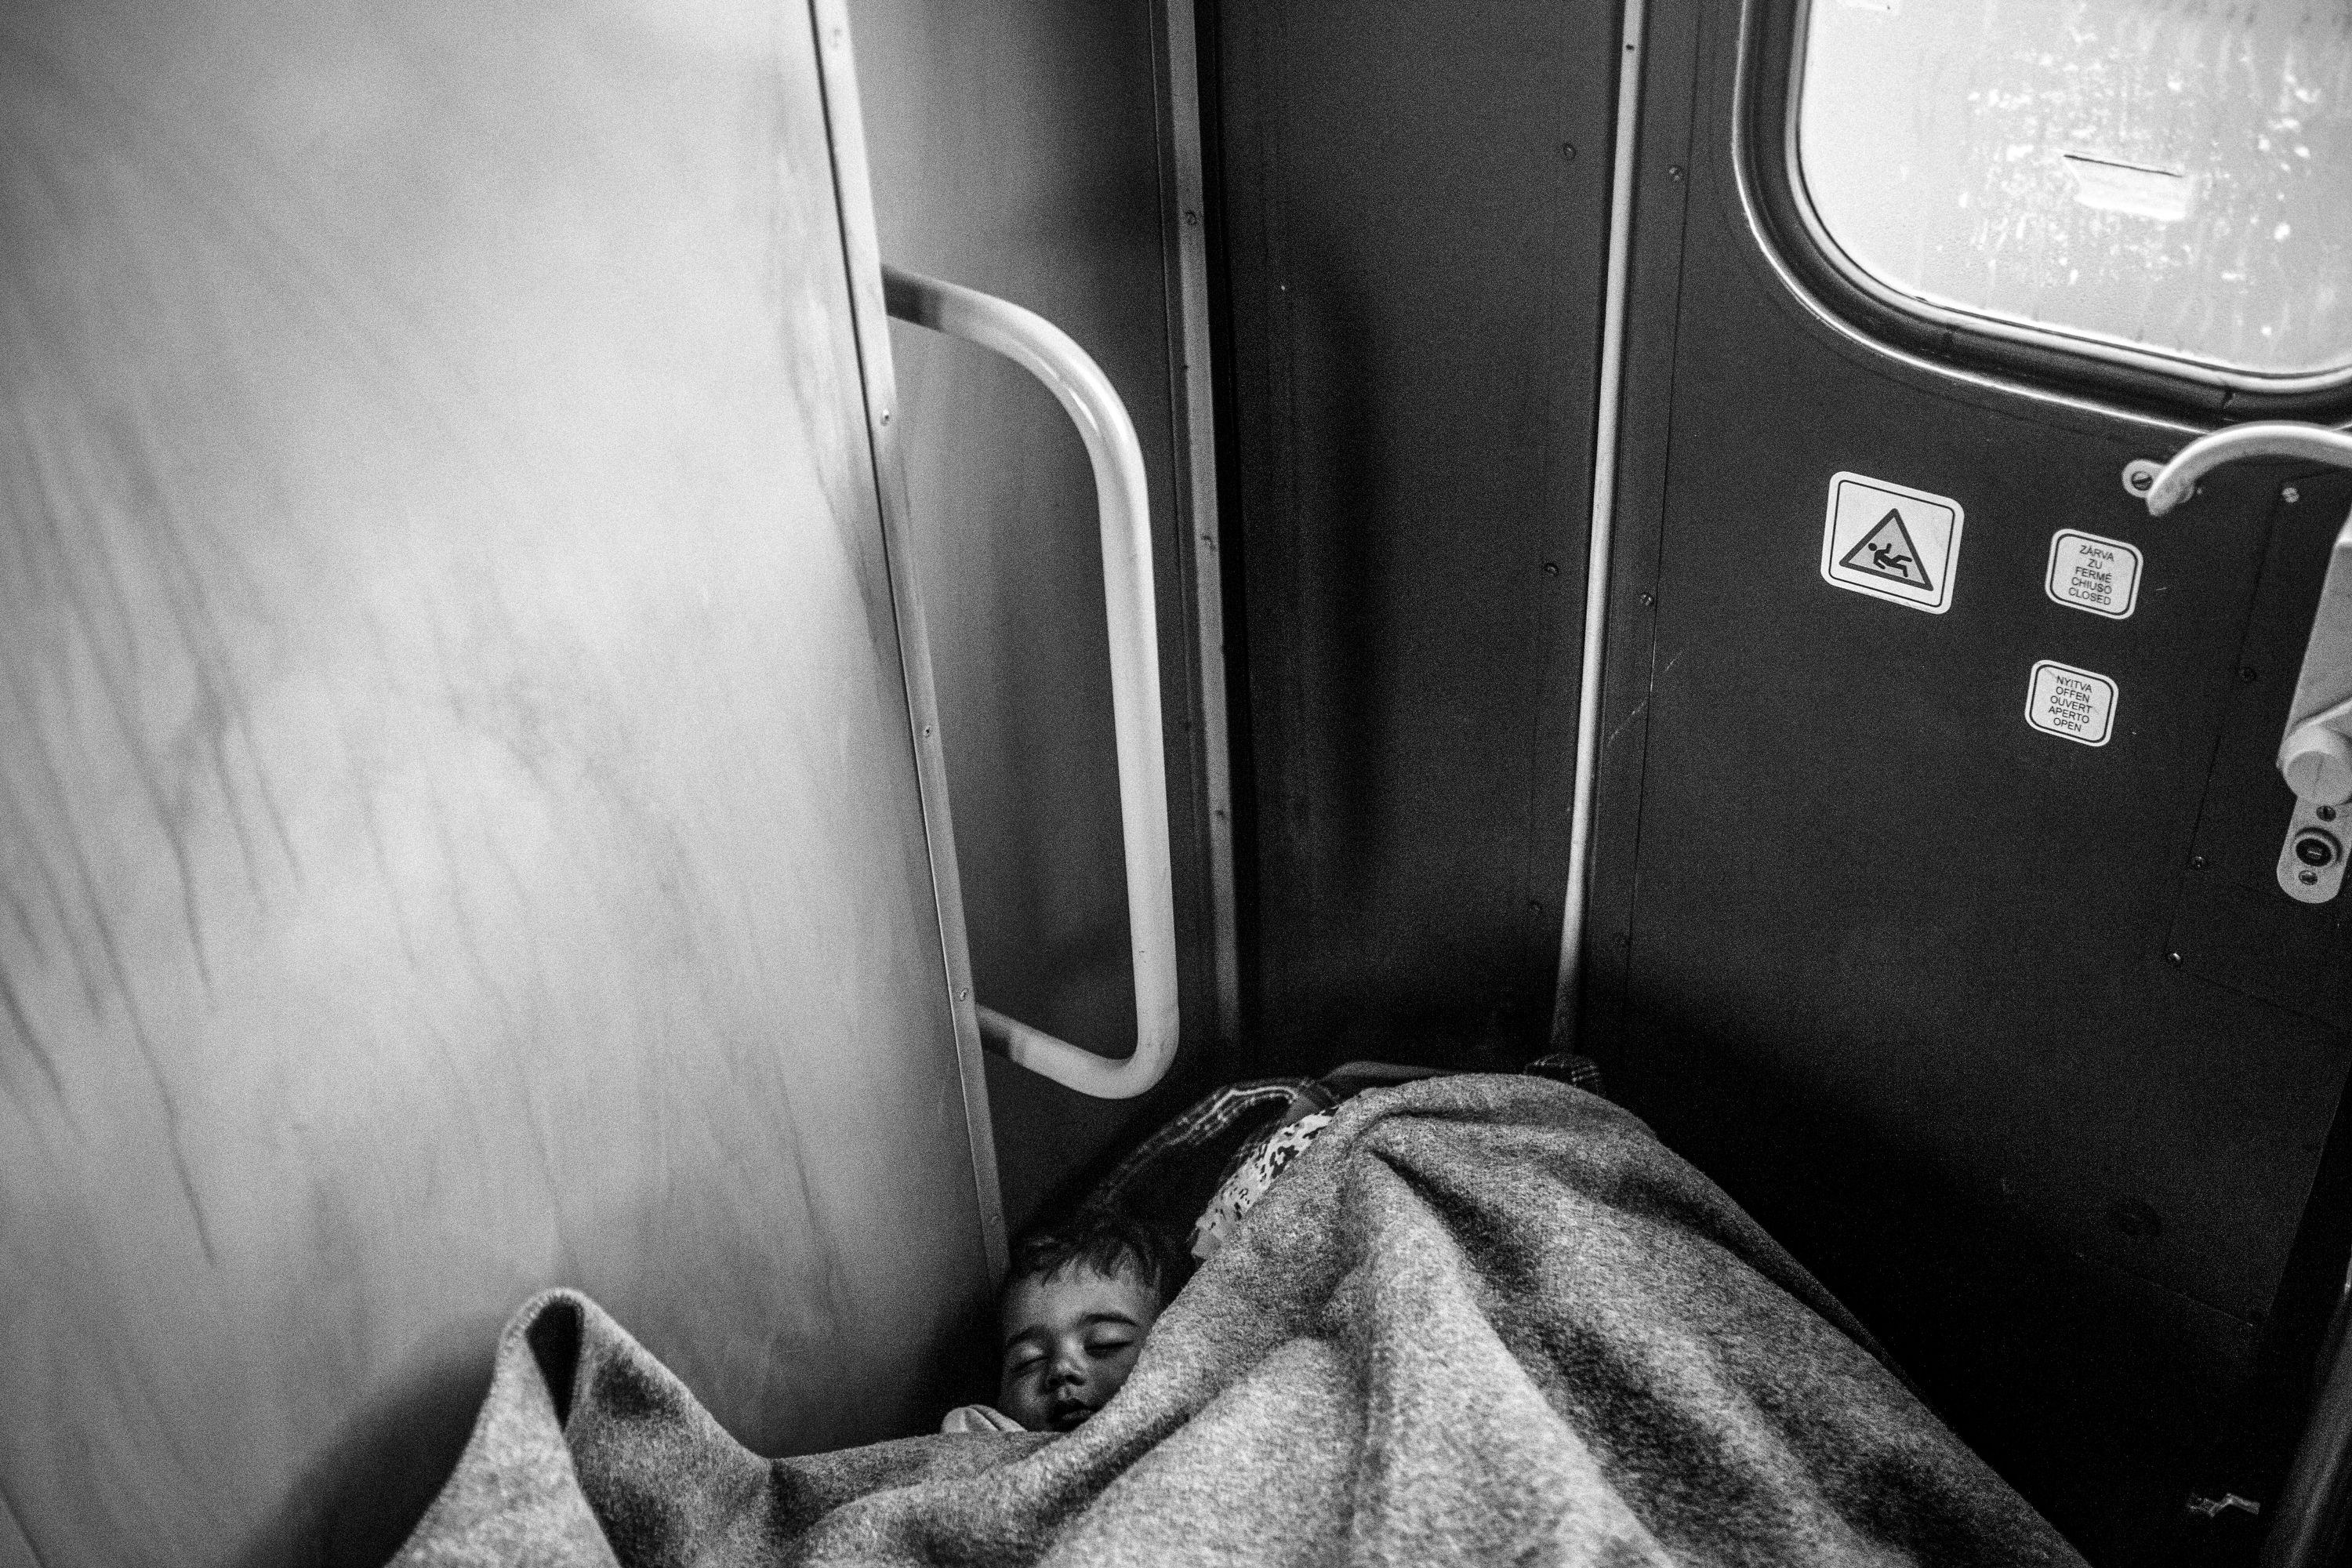 A Syrian refugee woman and her baby have no other choice but to sleep on the floor in a crowded train going to the Austrian border. Villany - Hungary, in September 2015 .